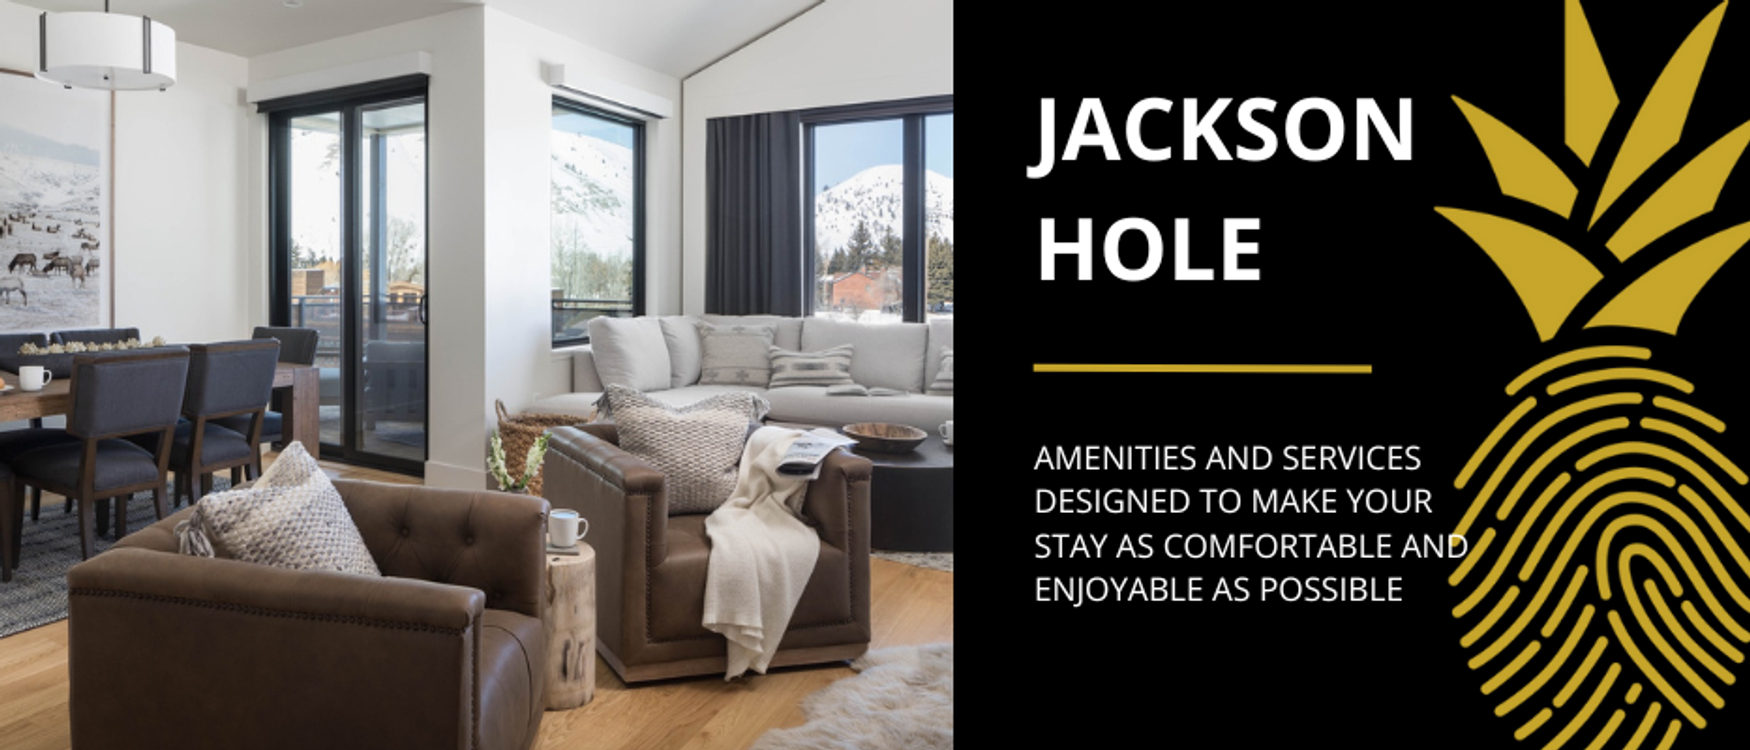 An image showcasing the luxurious amenities and services available at The Aspens Community in Jackson Hole, including the signature The Aspens Jackson Hole logo.